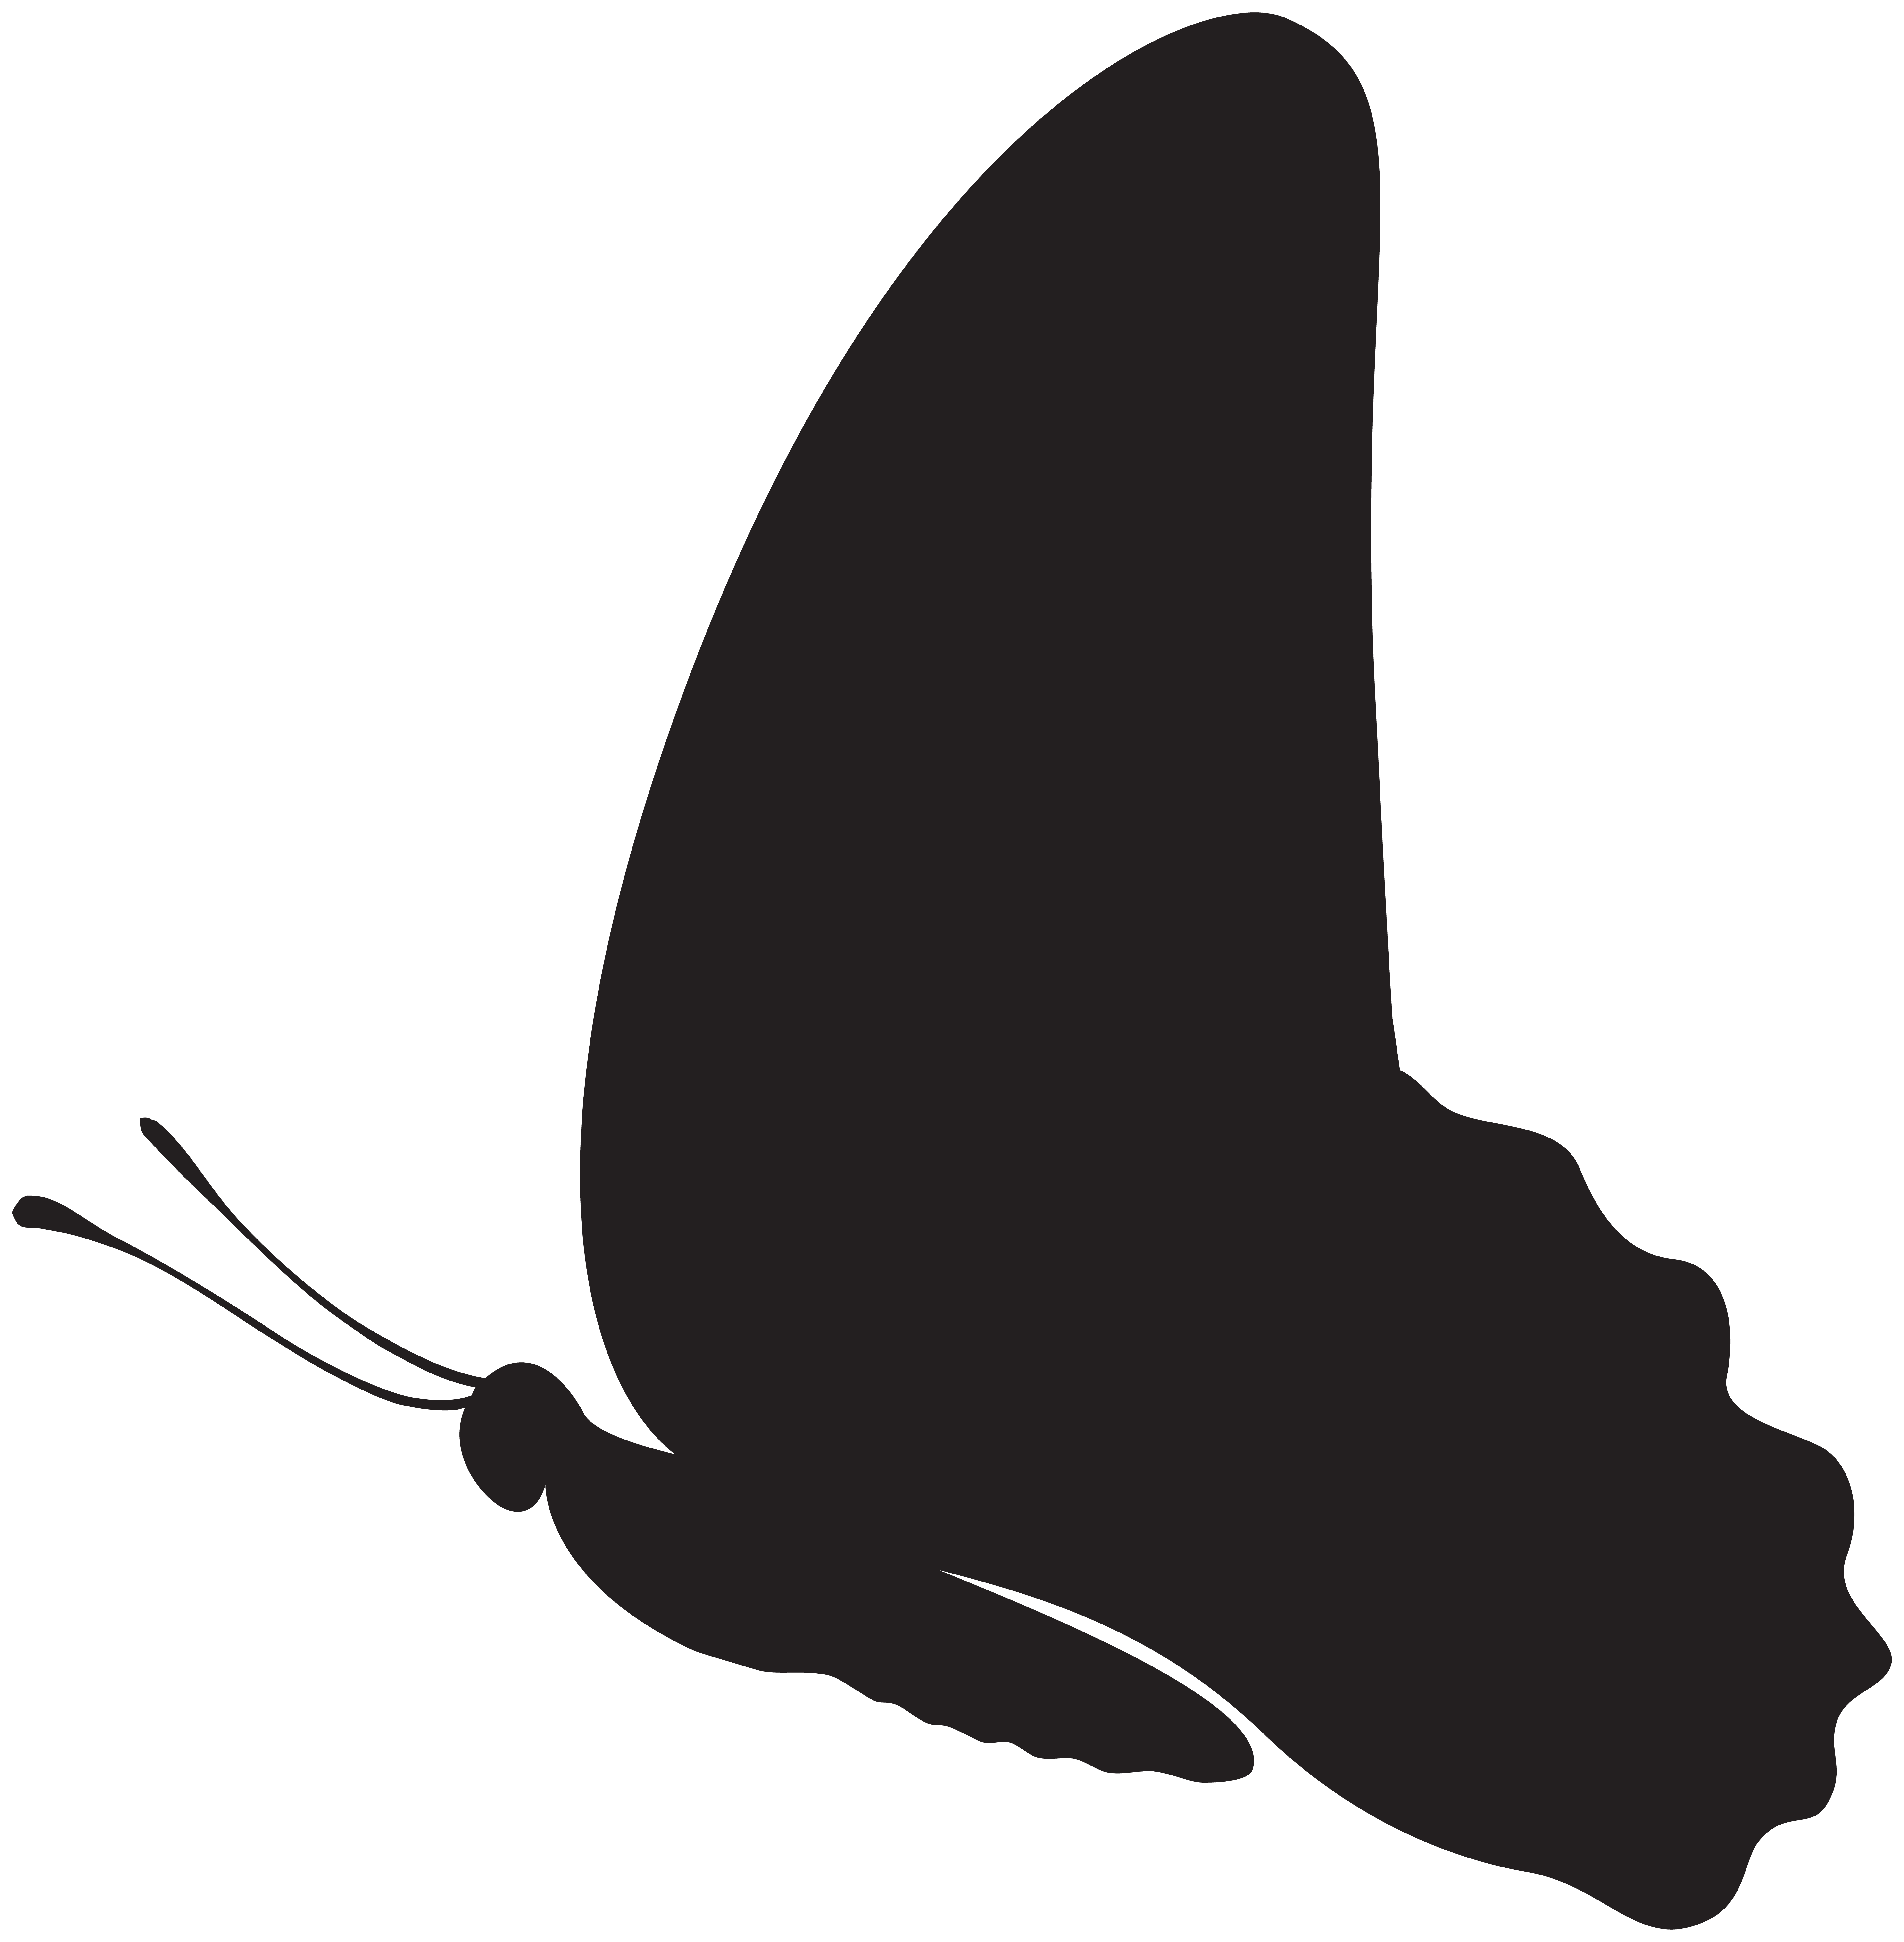 Butterfly Silhouette Clip Art PNG Image | Gallery Yopriceville 